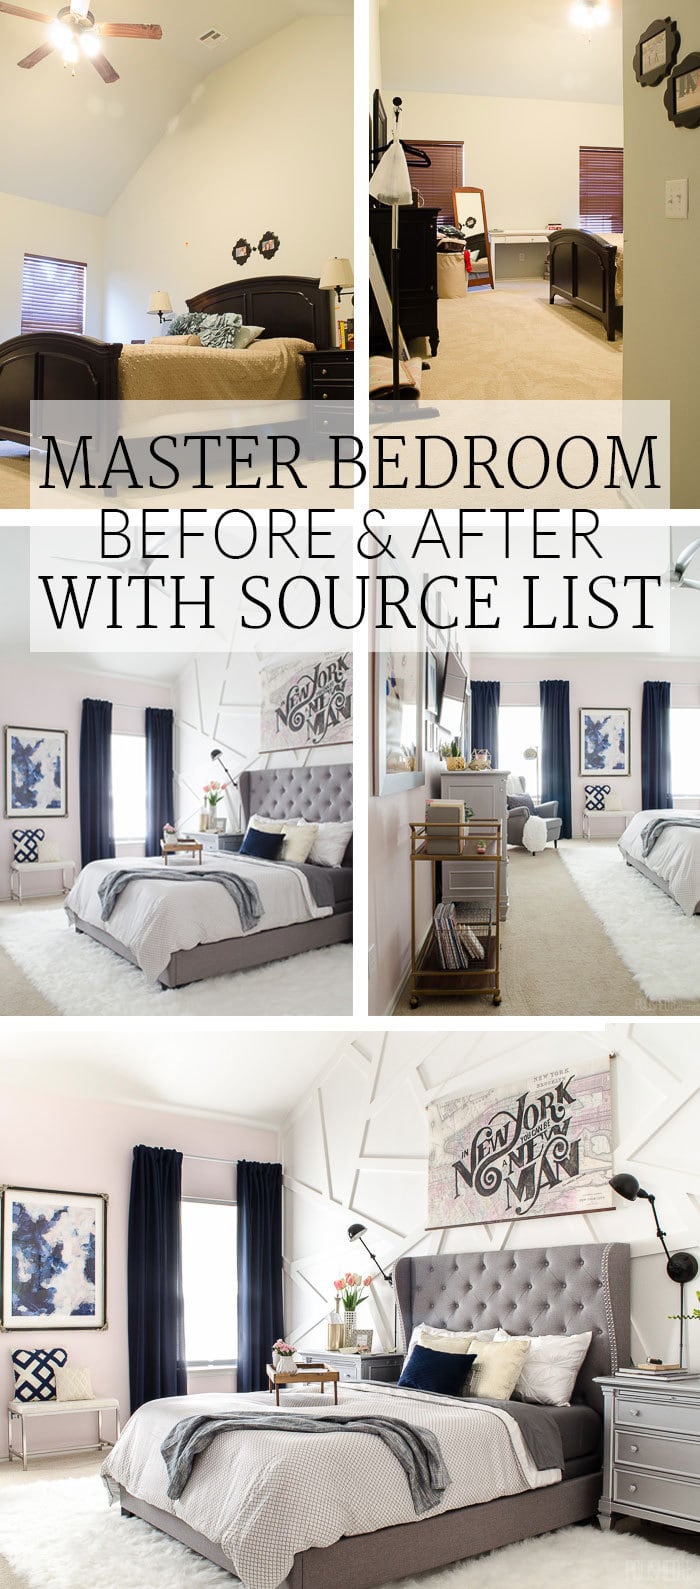 Whoa, the before is like my boring beige master bedroom. I can't believe this transformation! I'm totally ordering that gray tufted headboard! | Master Bedroom Before & After - from boring beige to modern glam